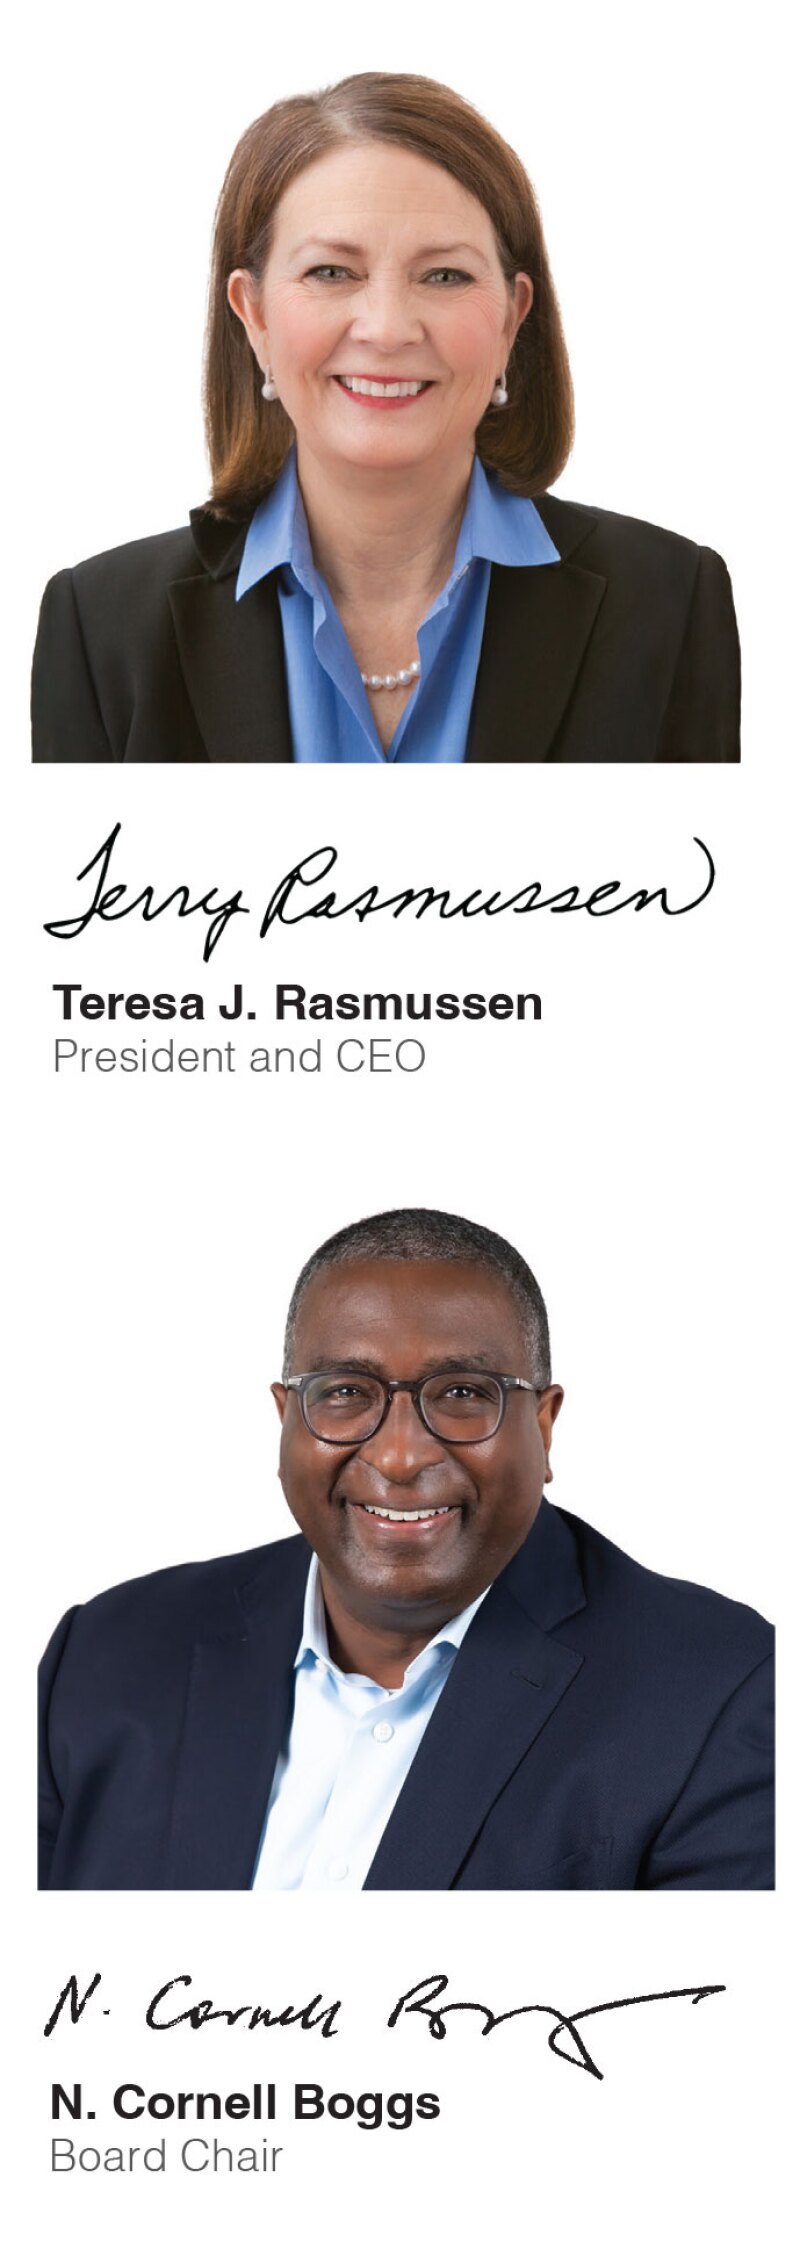 Photos and signatures of Thrivent CEO Teresa J. Rasmussen and Thrivent board chair N. Cornell Boggs